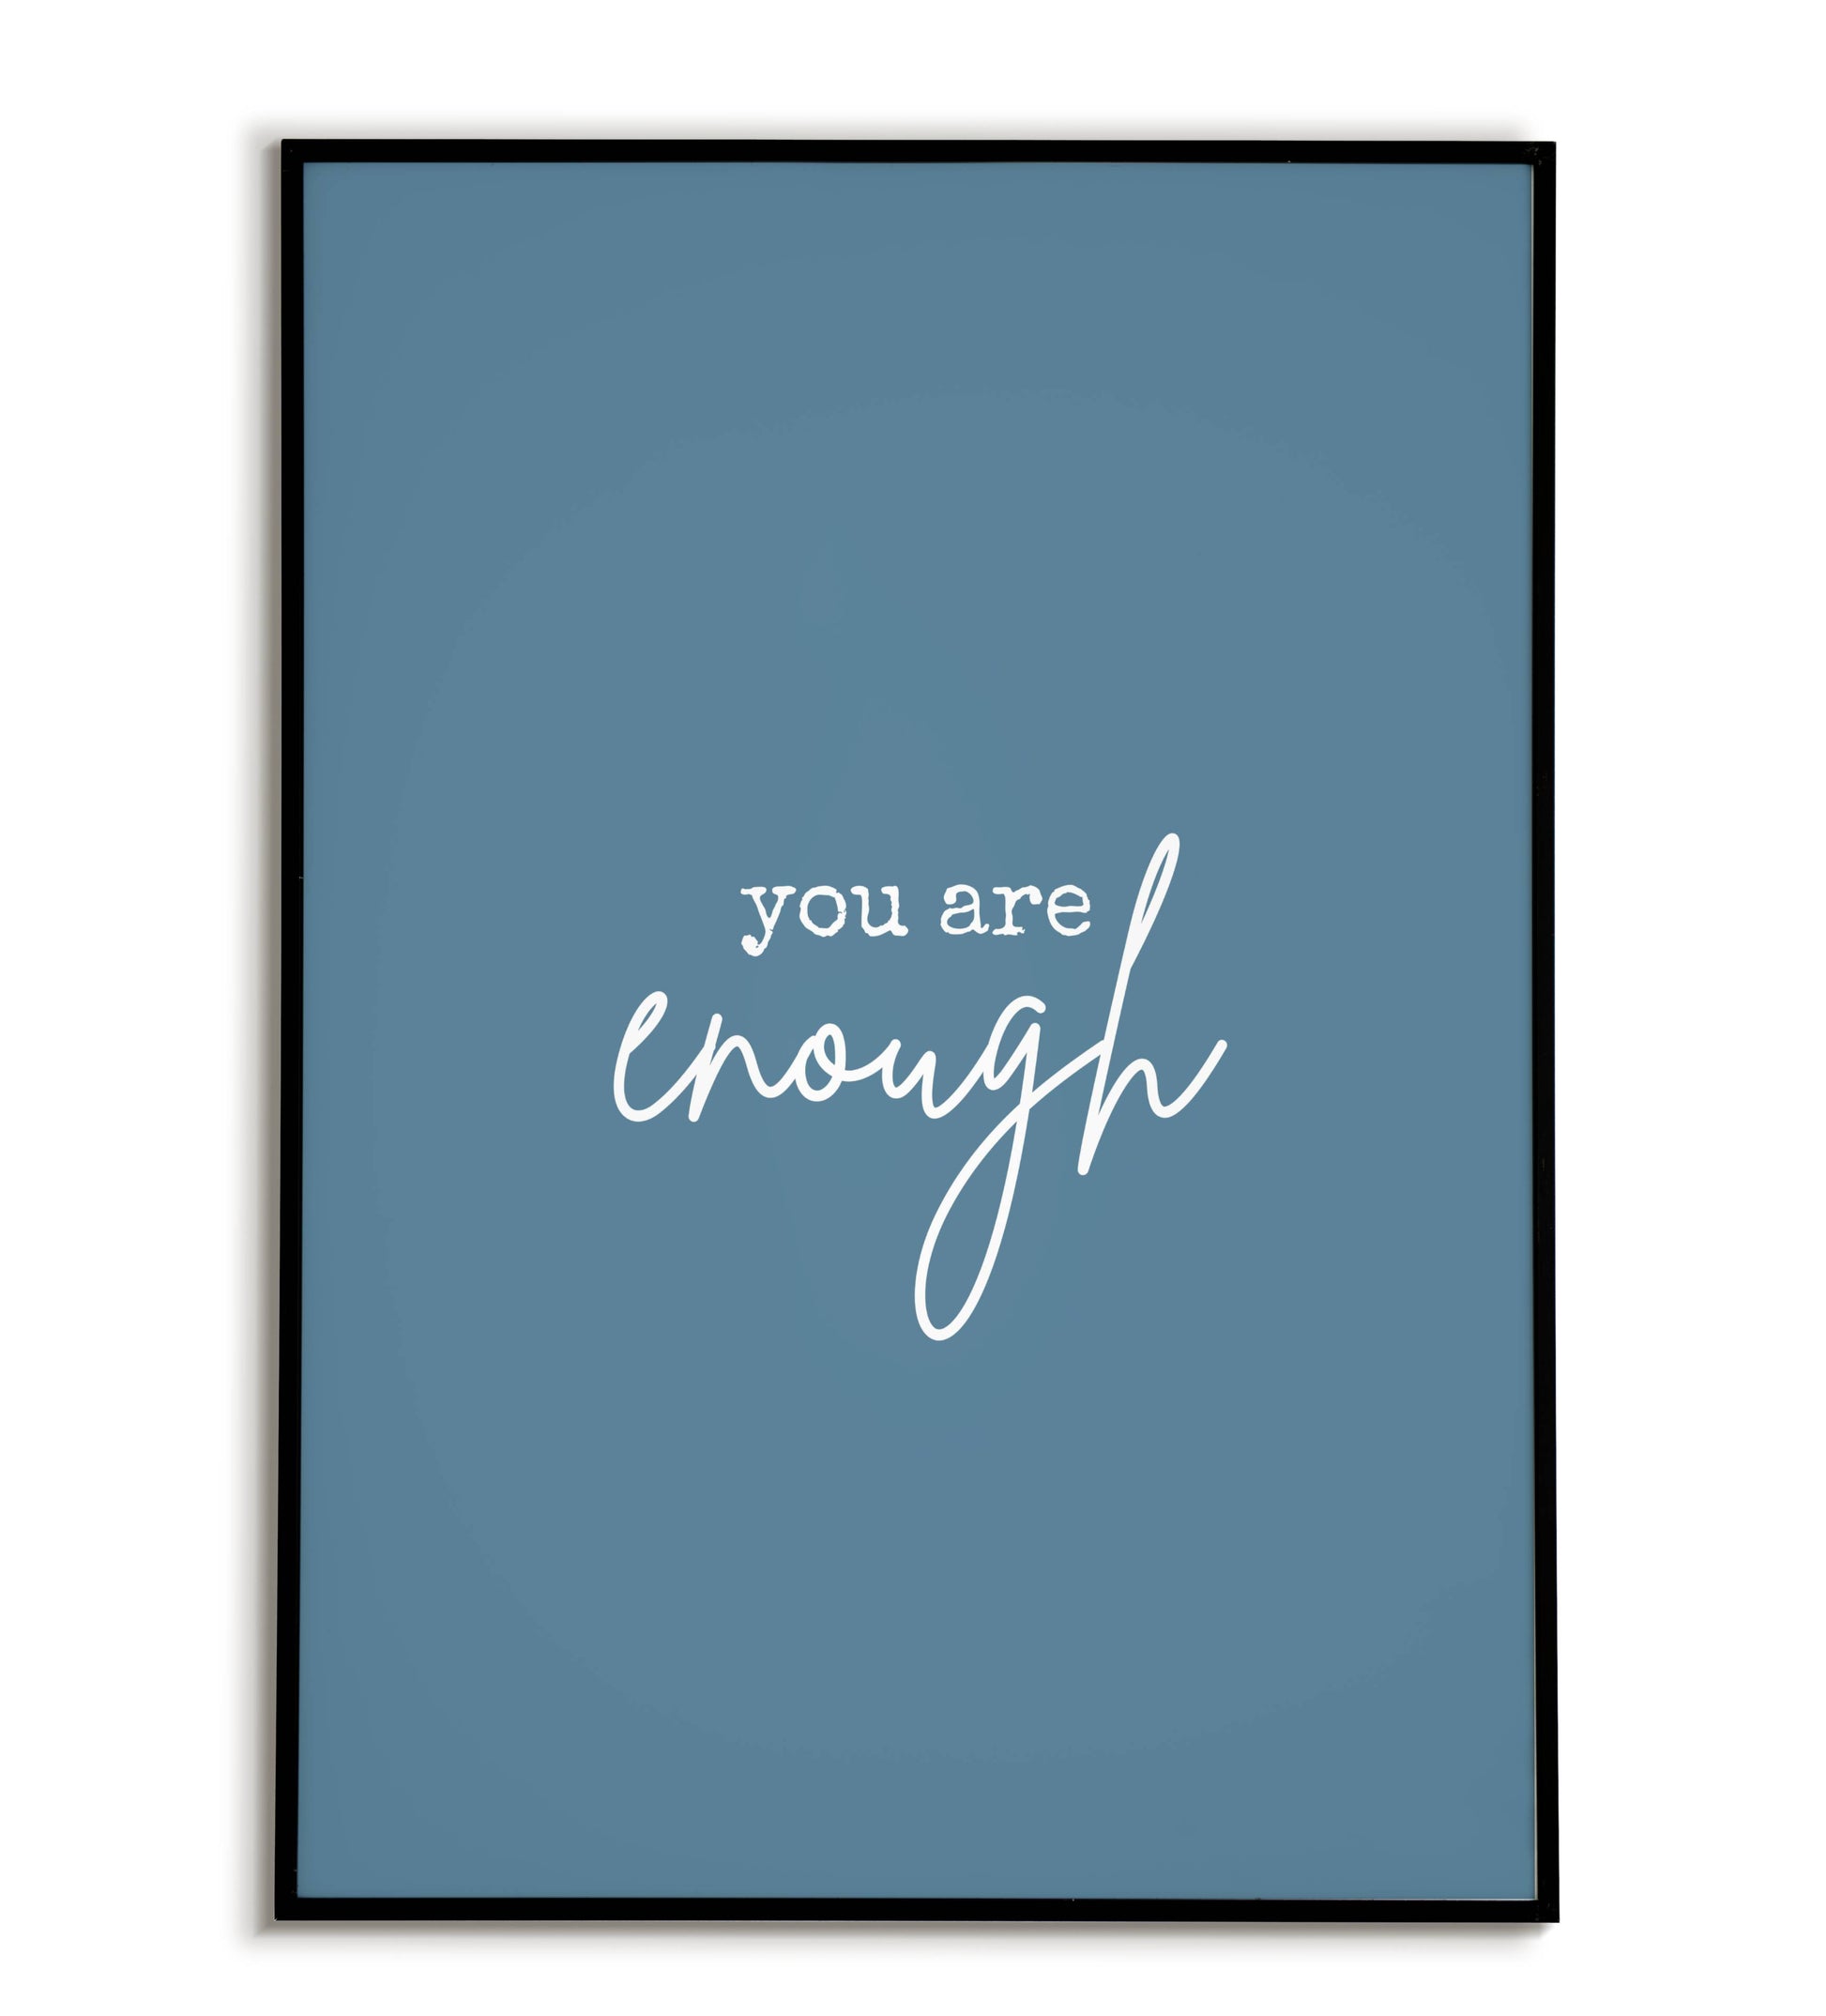 You are enough - Printable Wall Art / Poster. Download this design to enhance your space.	